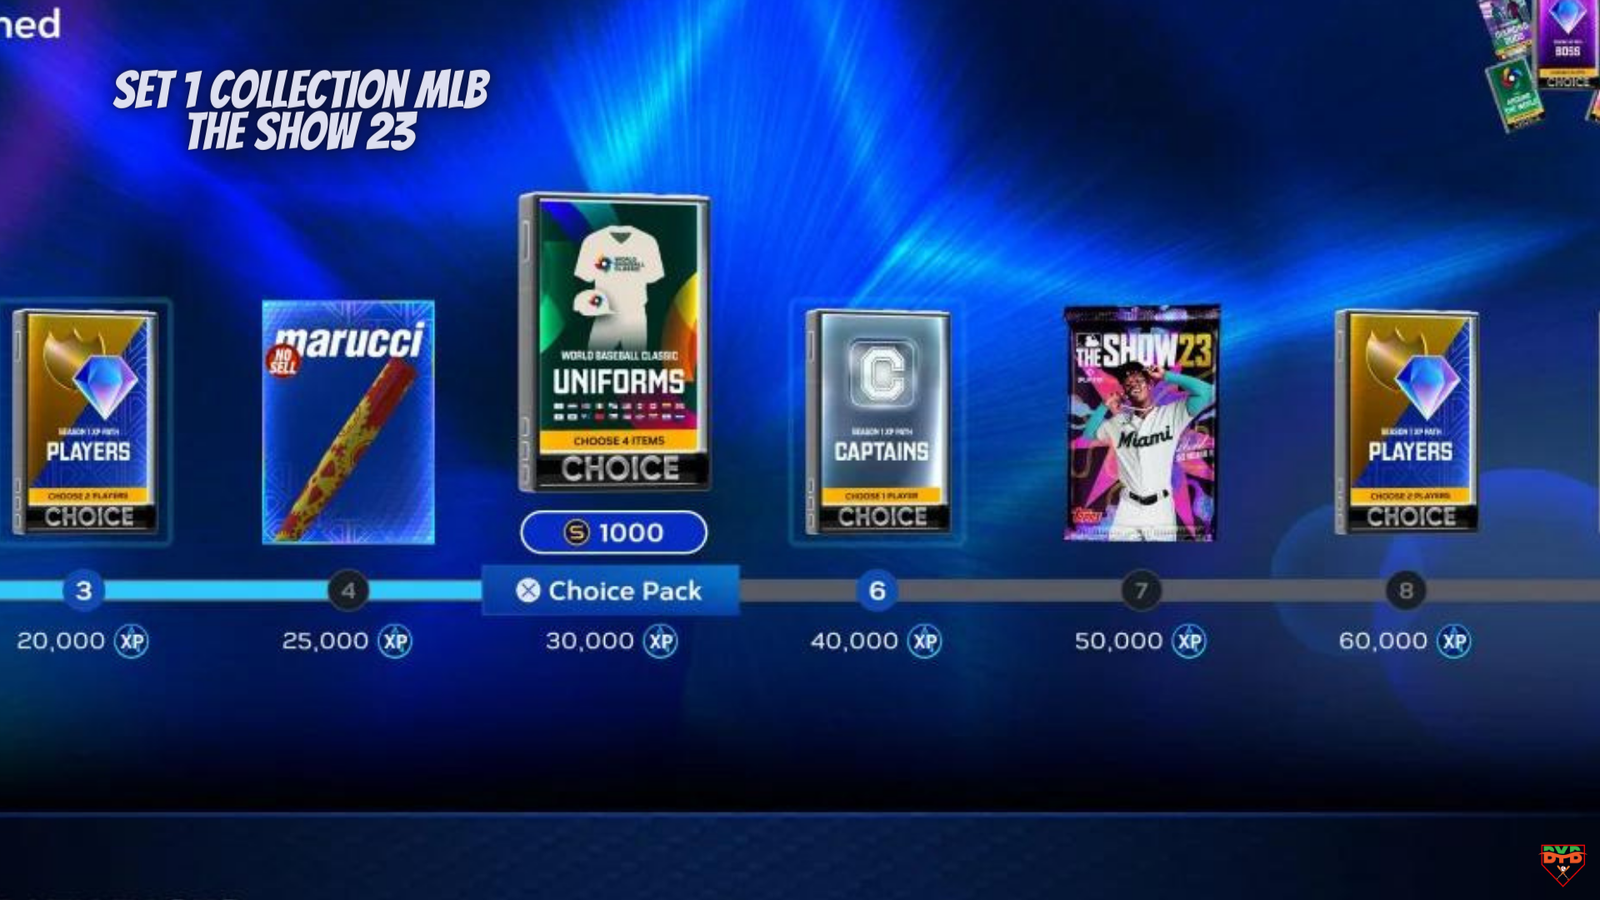 Are these the collection rewards in MLB The Show 23? #fyp